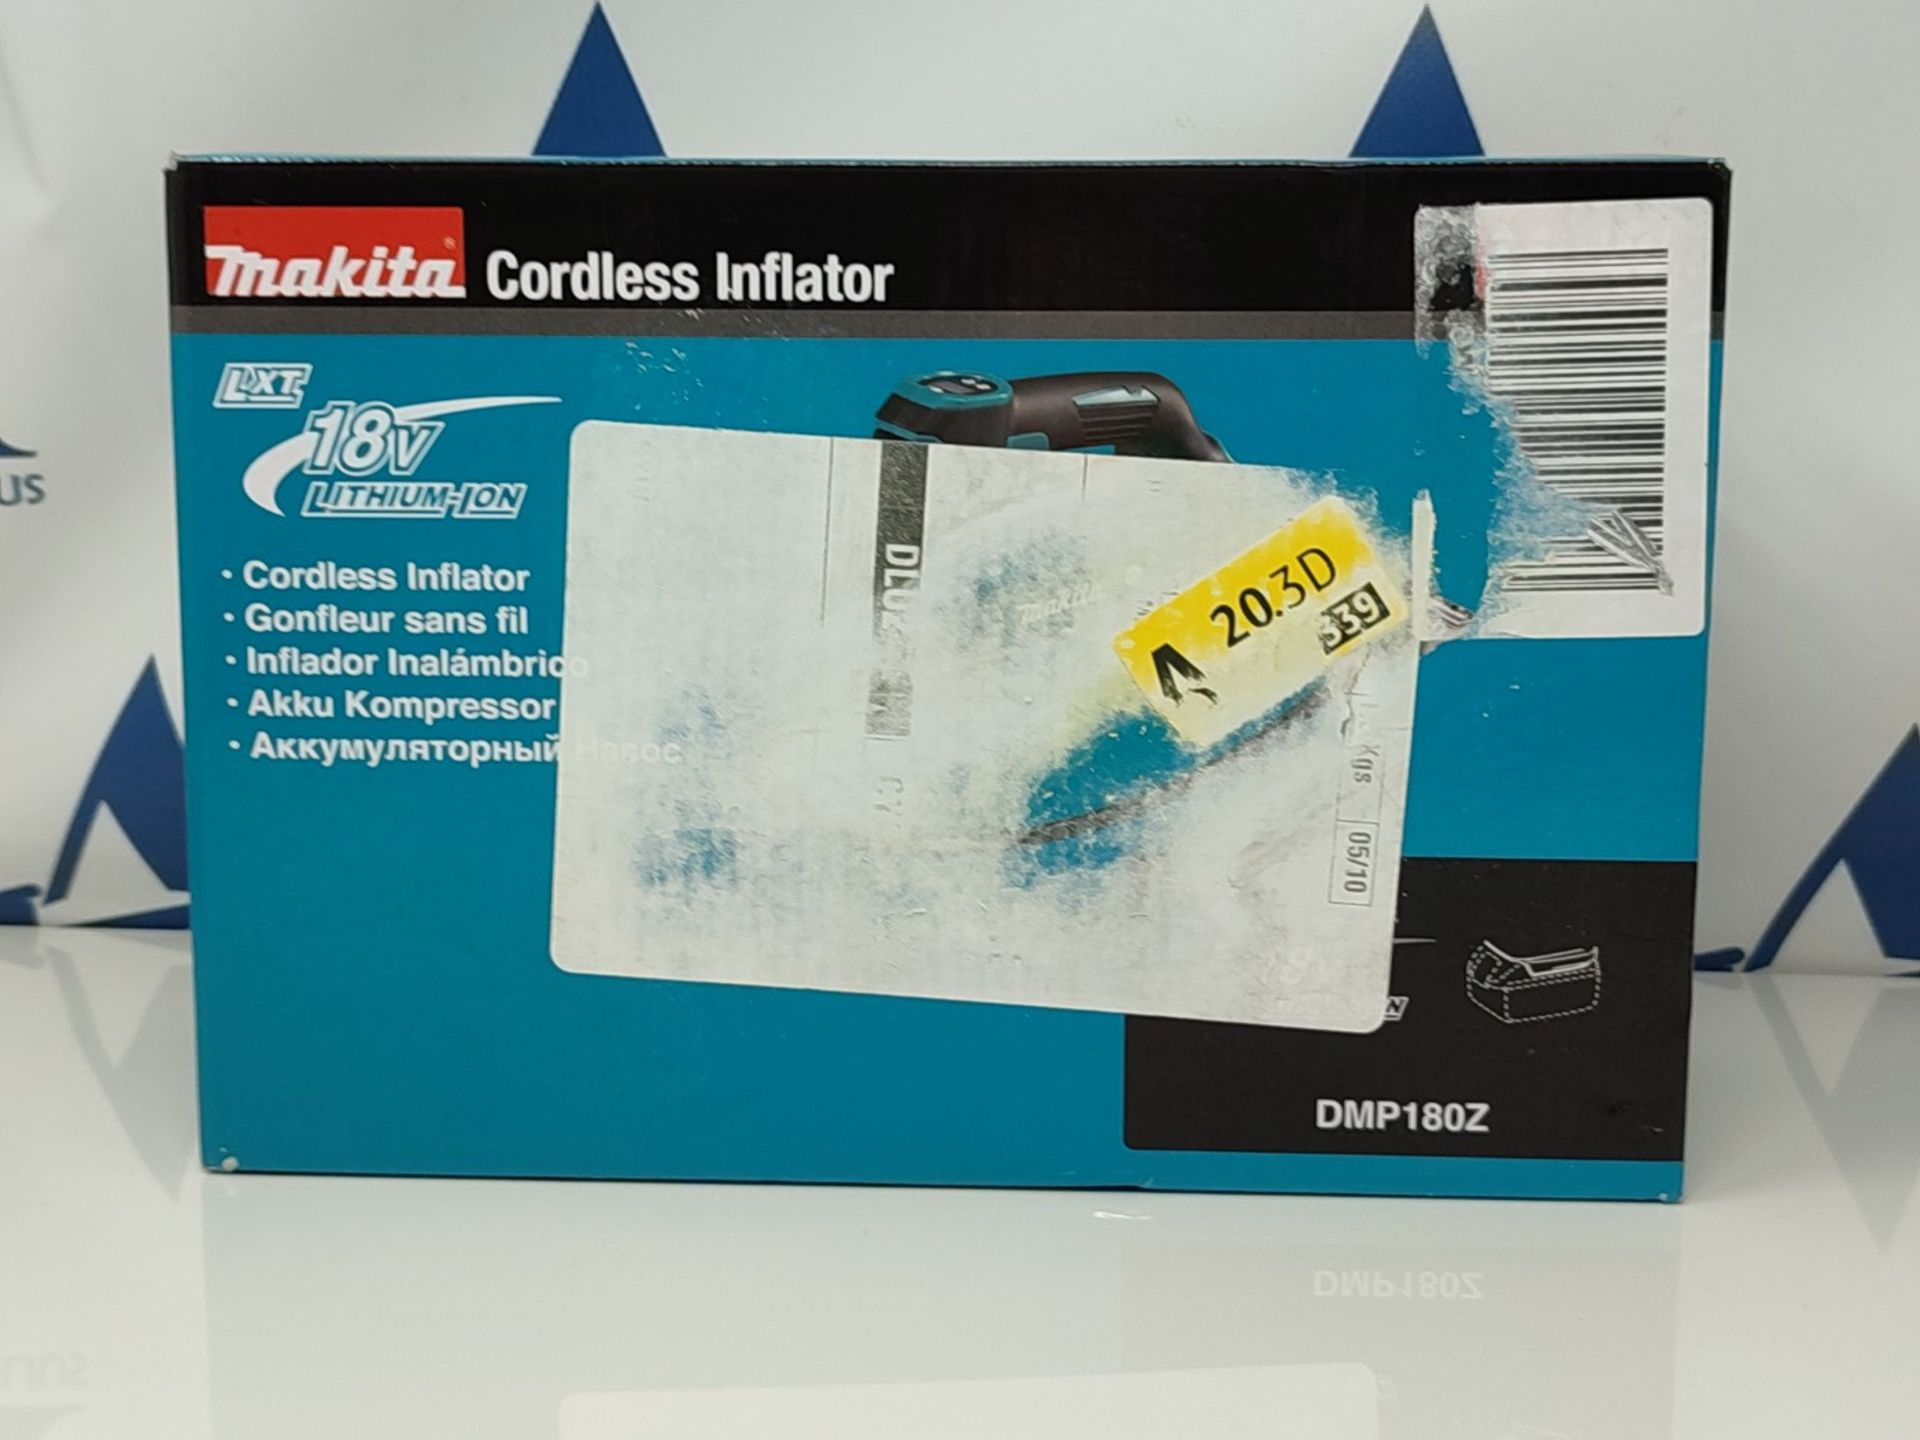 RRP £57.00 Makita DMP180Z 18V Li-ion LXT Inflator - Batteries and Charger Not Included, Blue/Silv - Image 2 of 3